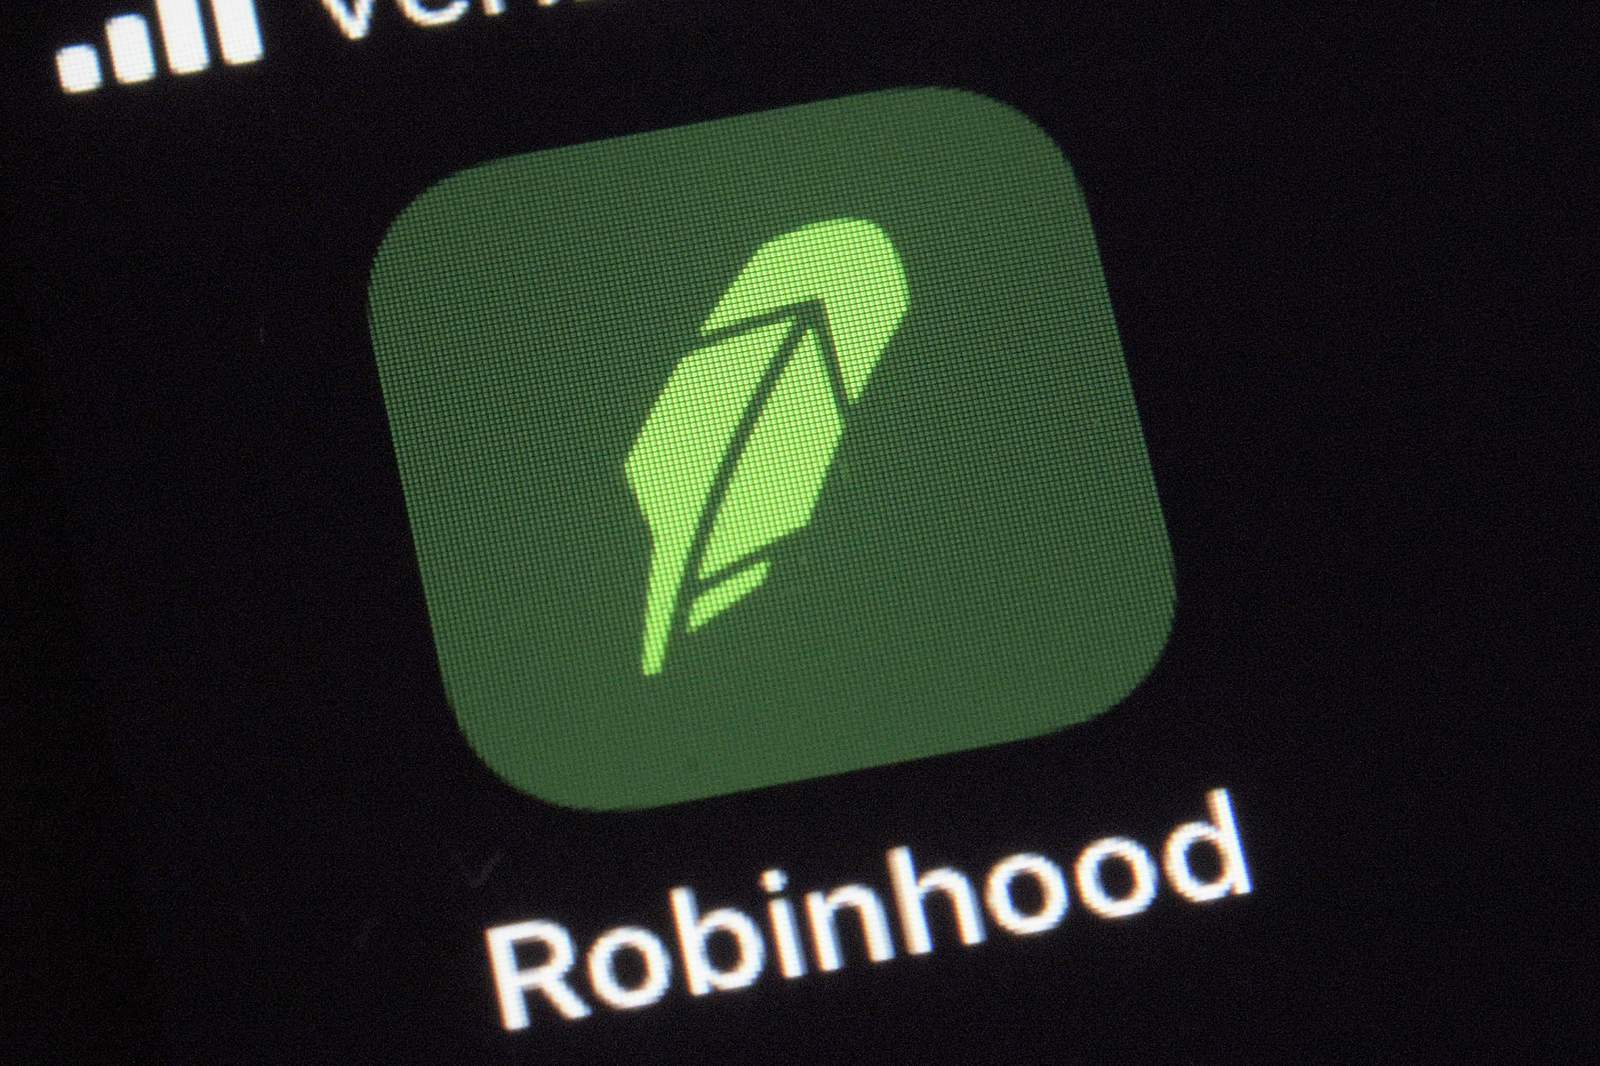 Robinhood agrees to pay $65 million to settle SEC charges